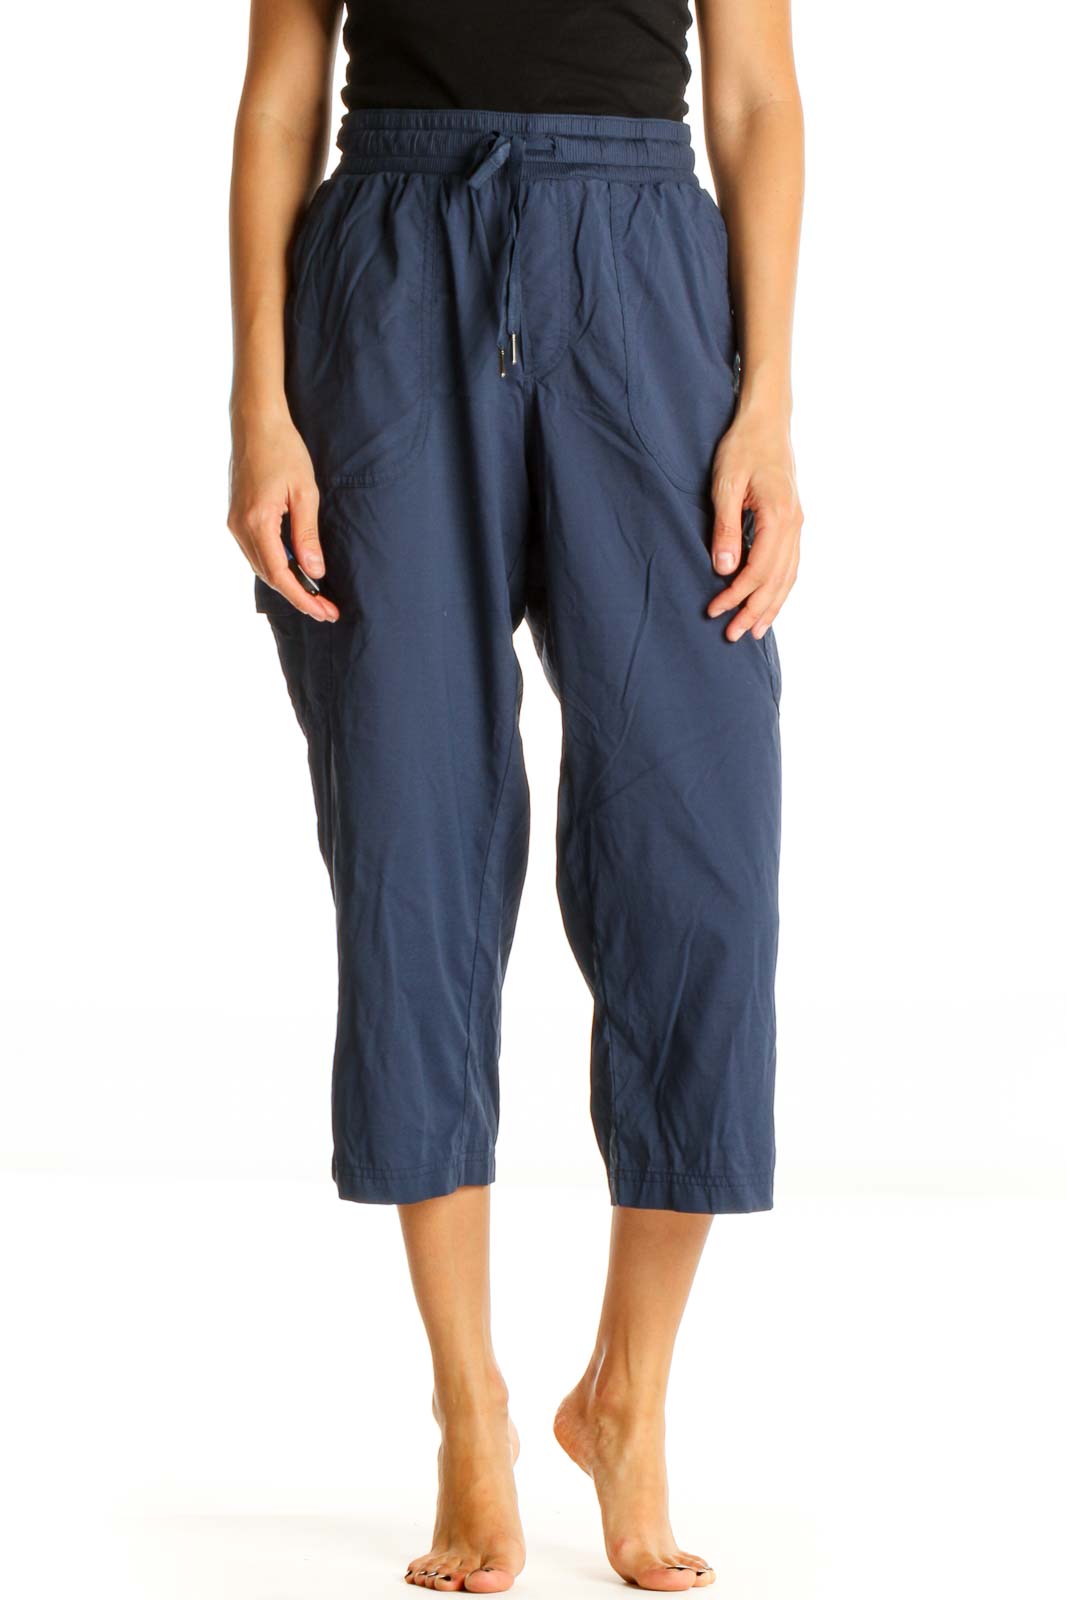 Blue Solid Casual Cargos Pants Front